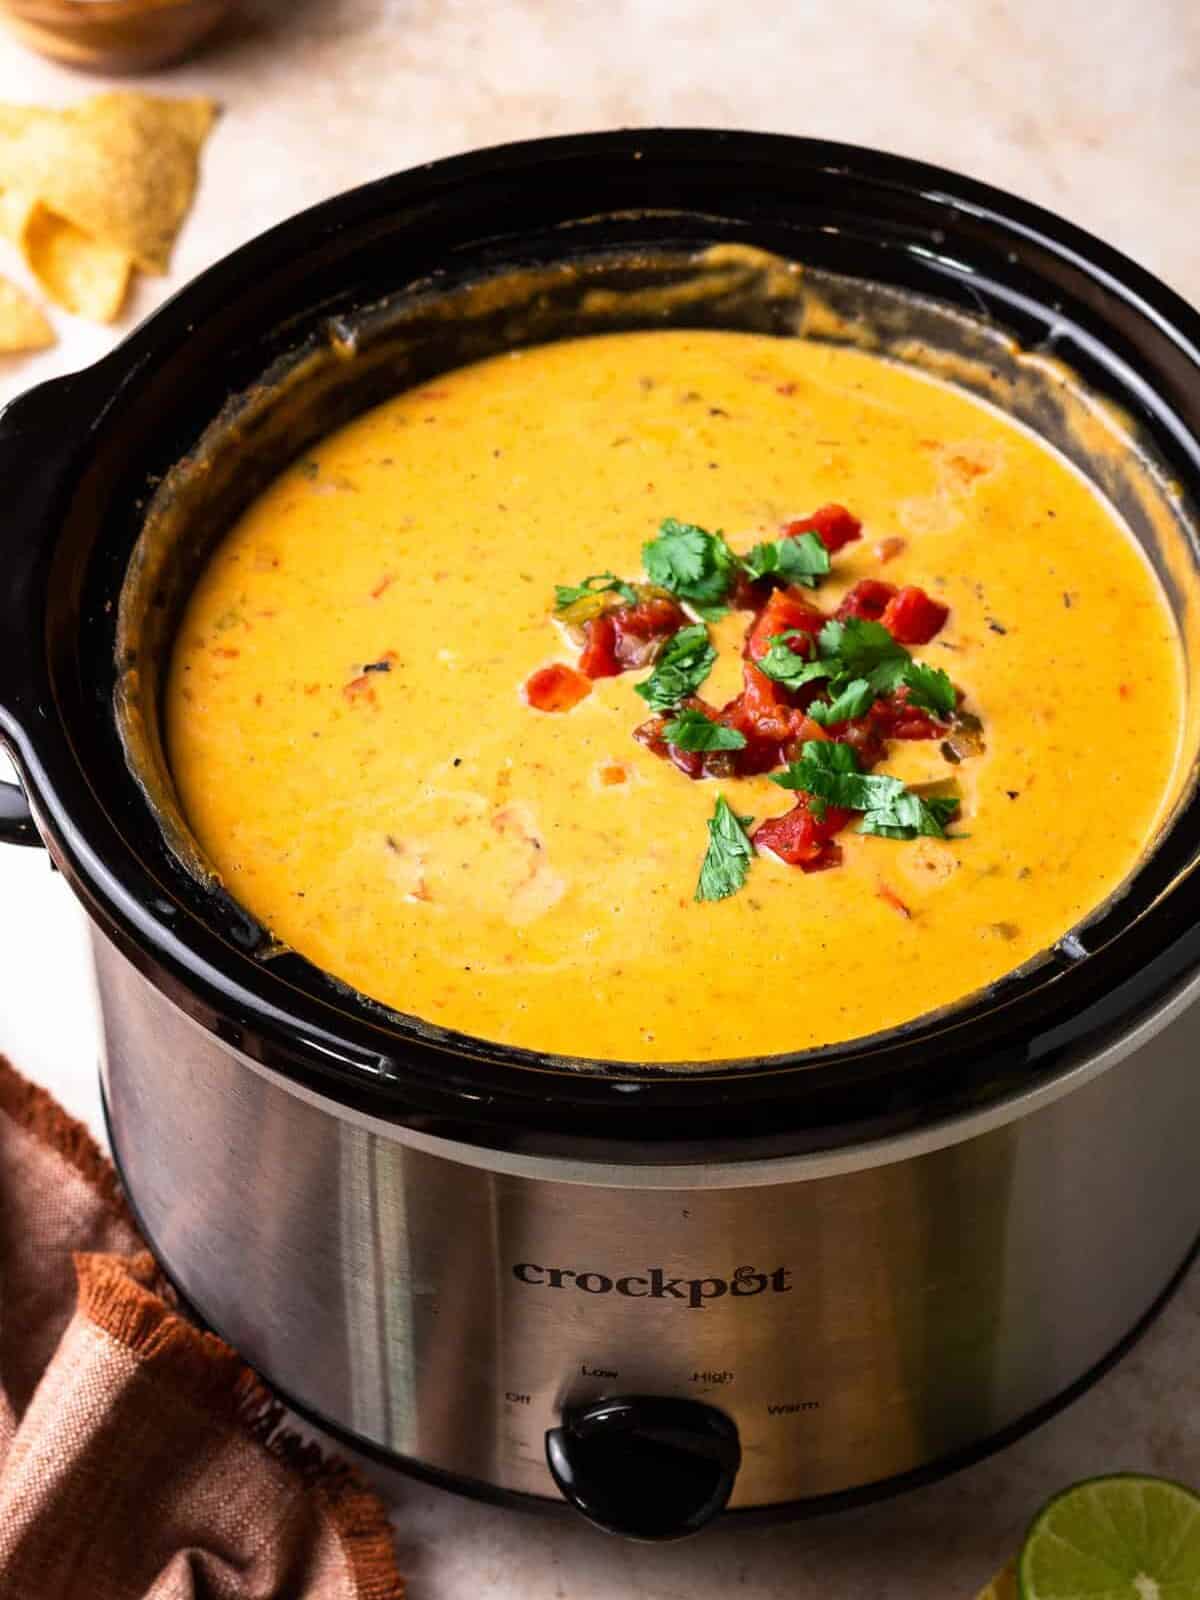 queso cheese cooking in a Crockpot